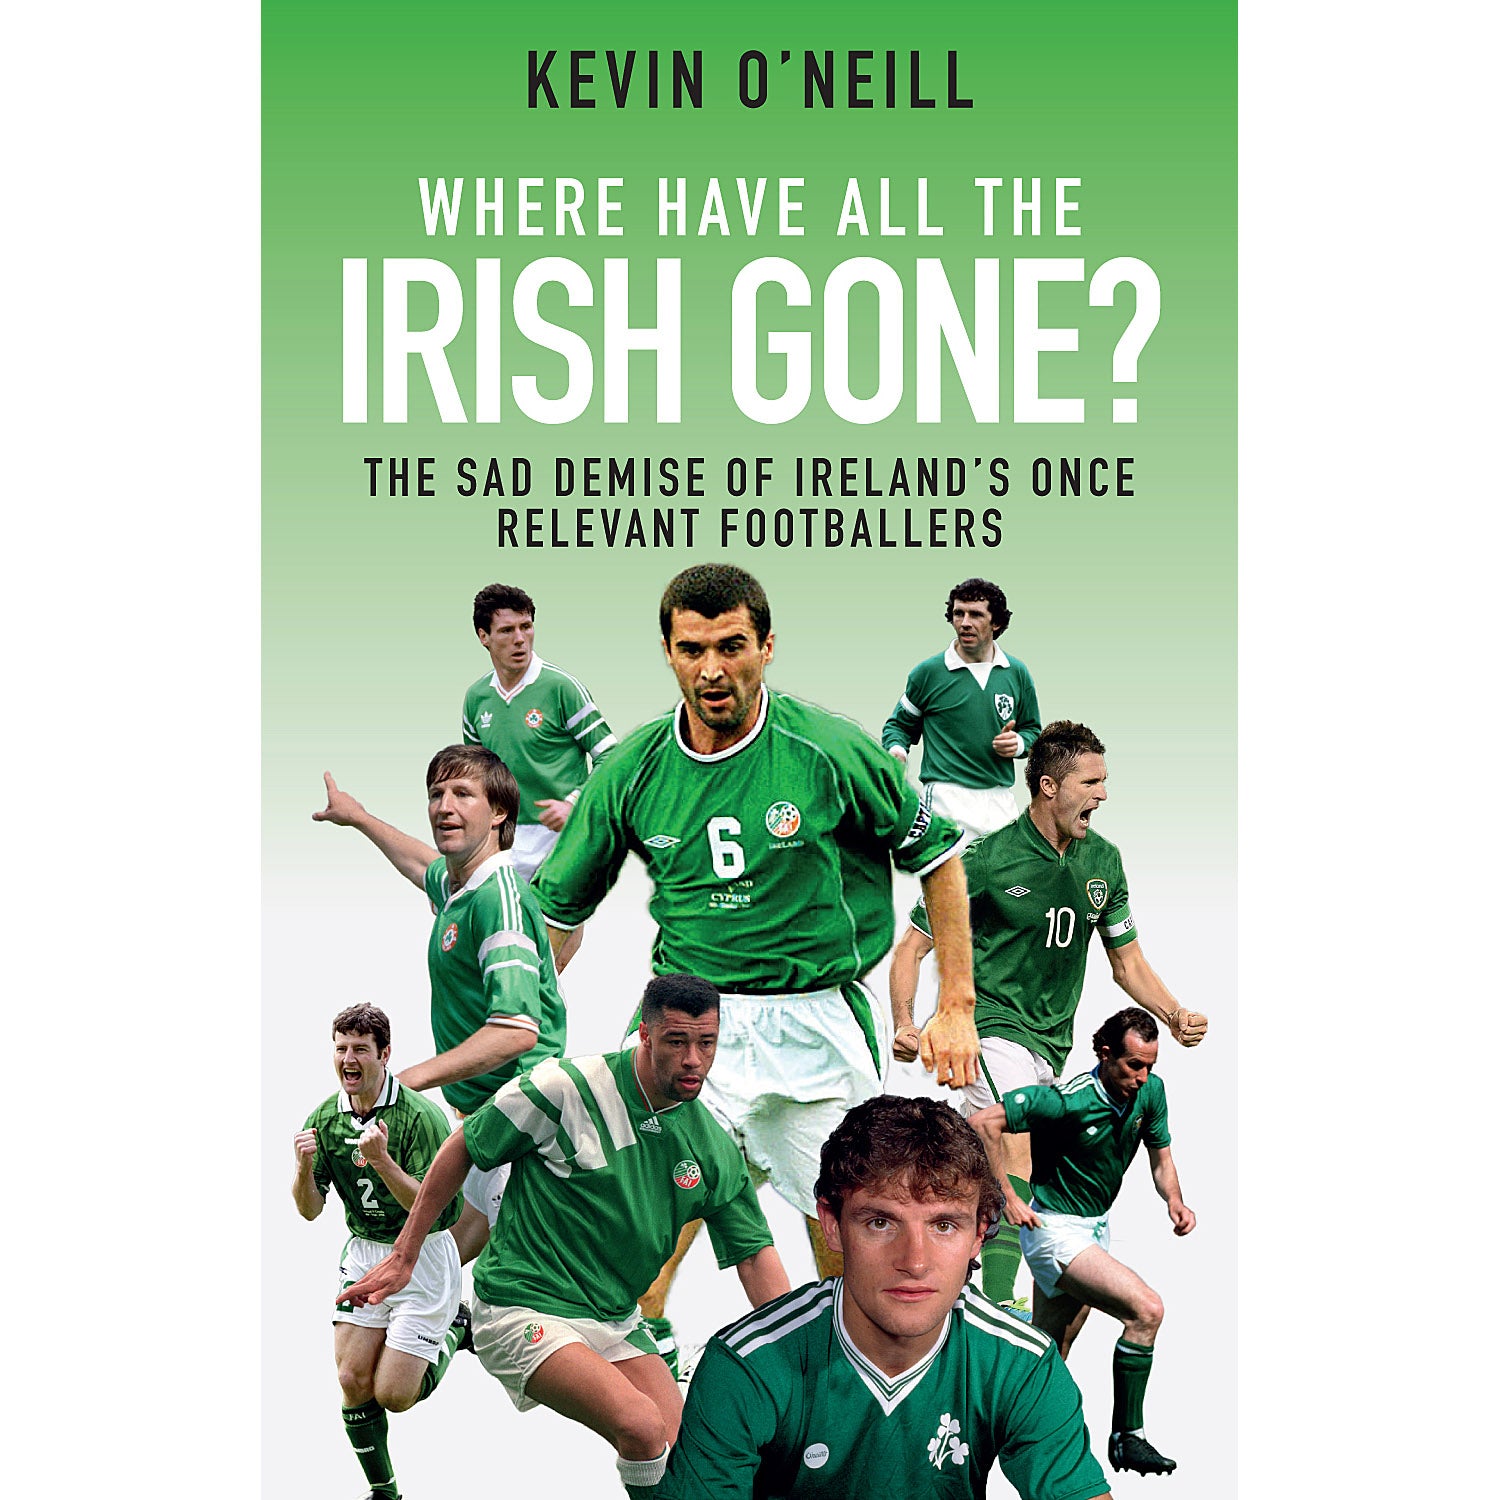 Where Have All the Irish Gone? The Sad Demise of Ireland's Once Relevant Footballers